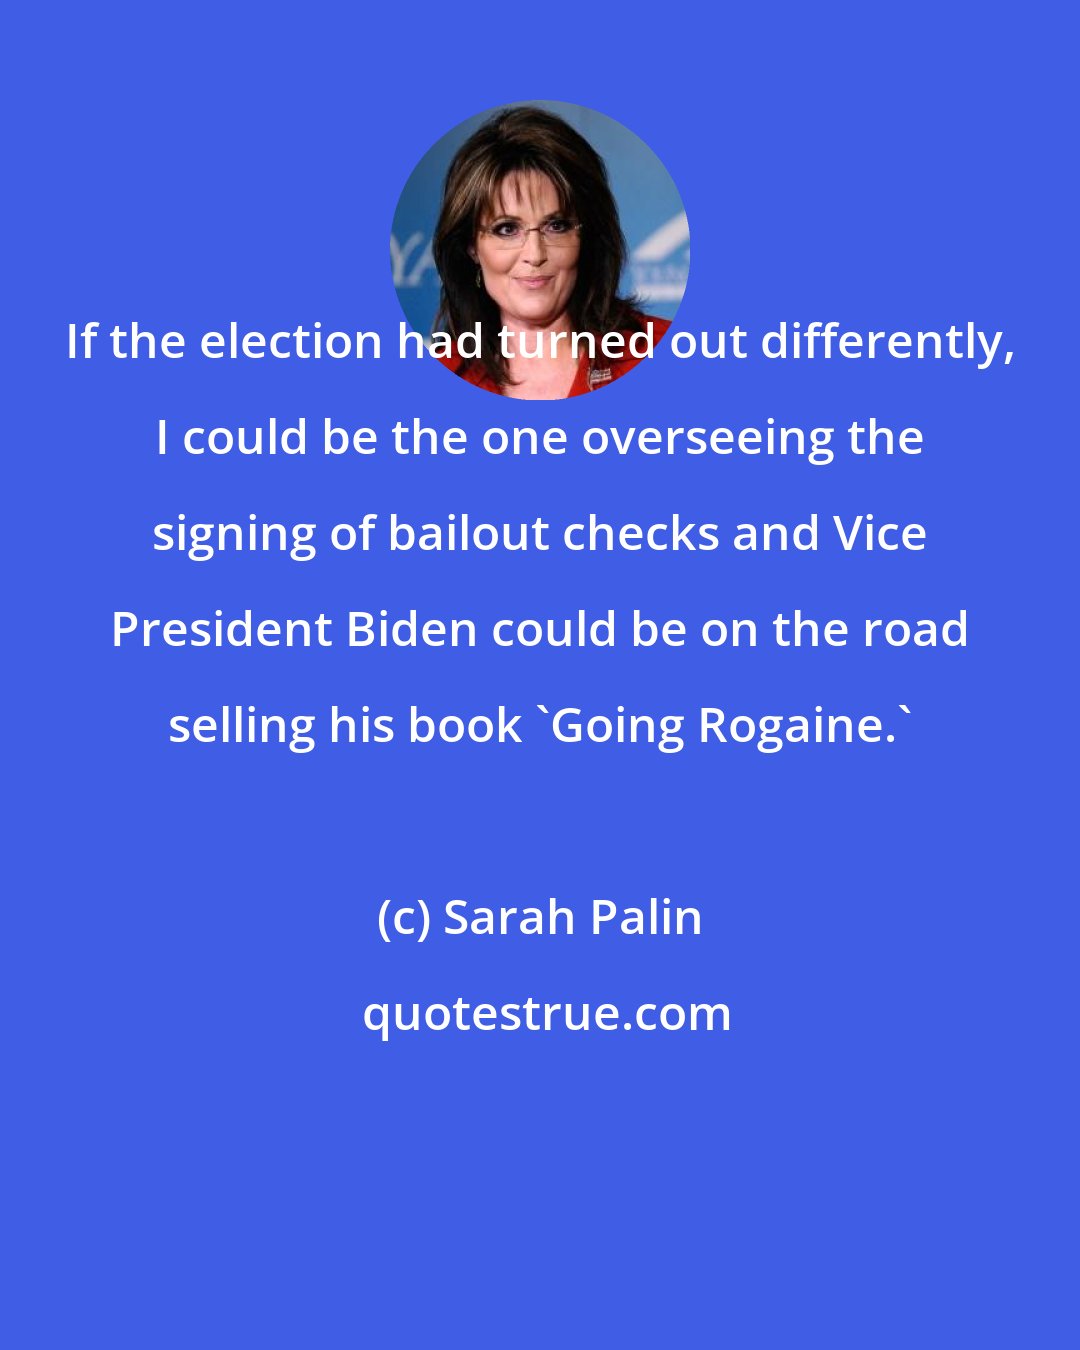 Sarah Palin: If the election had turned out differently, I could be the one overseeing the signing of bailout checks and Vice President Biden could be on the road selling his book 'Going Rogaine.'